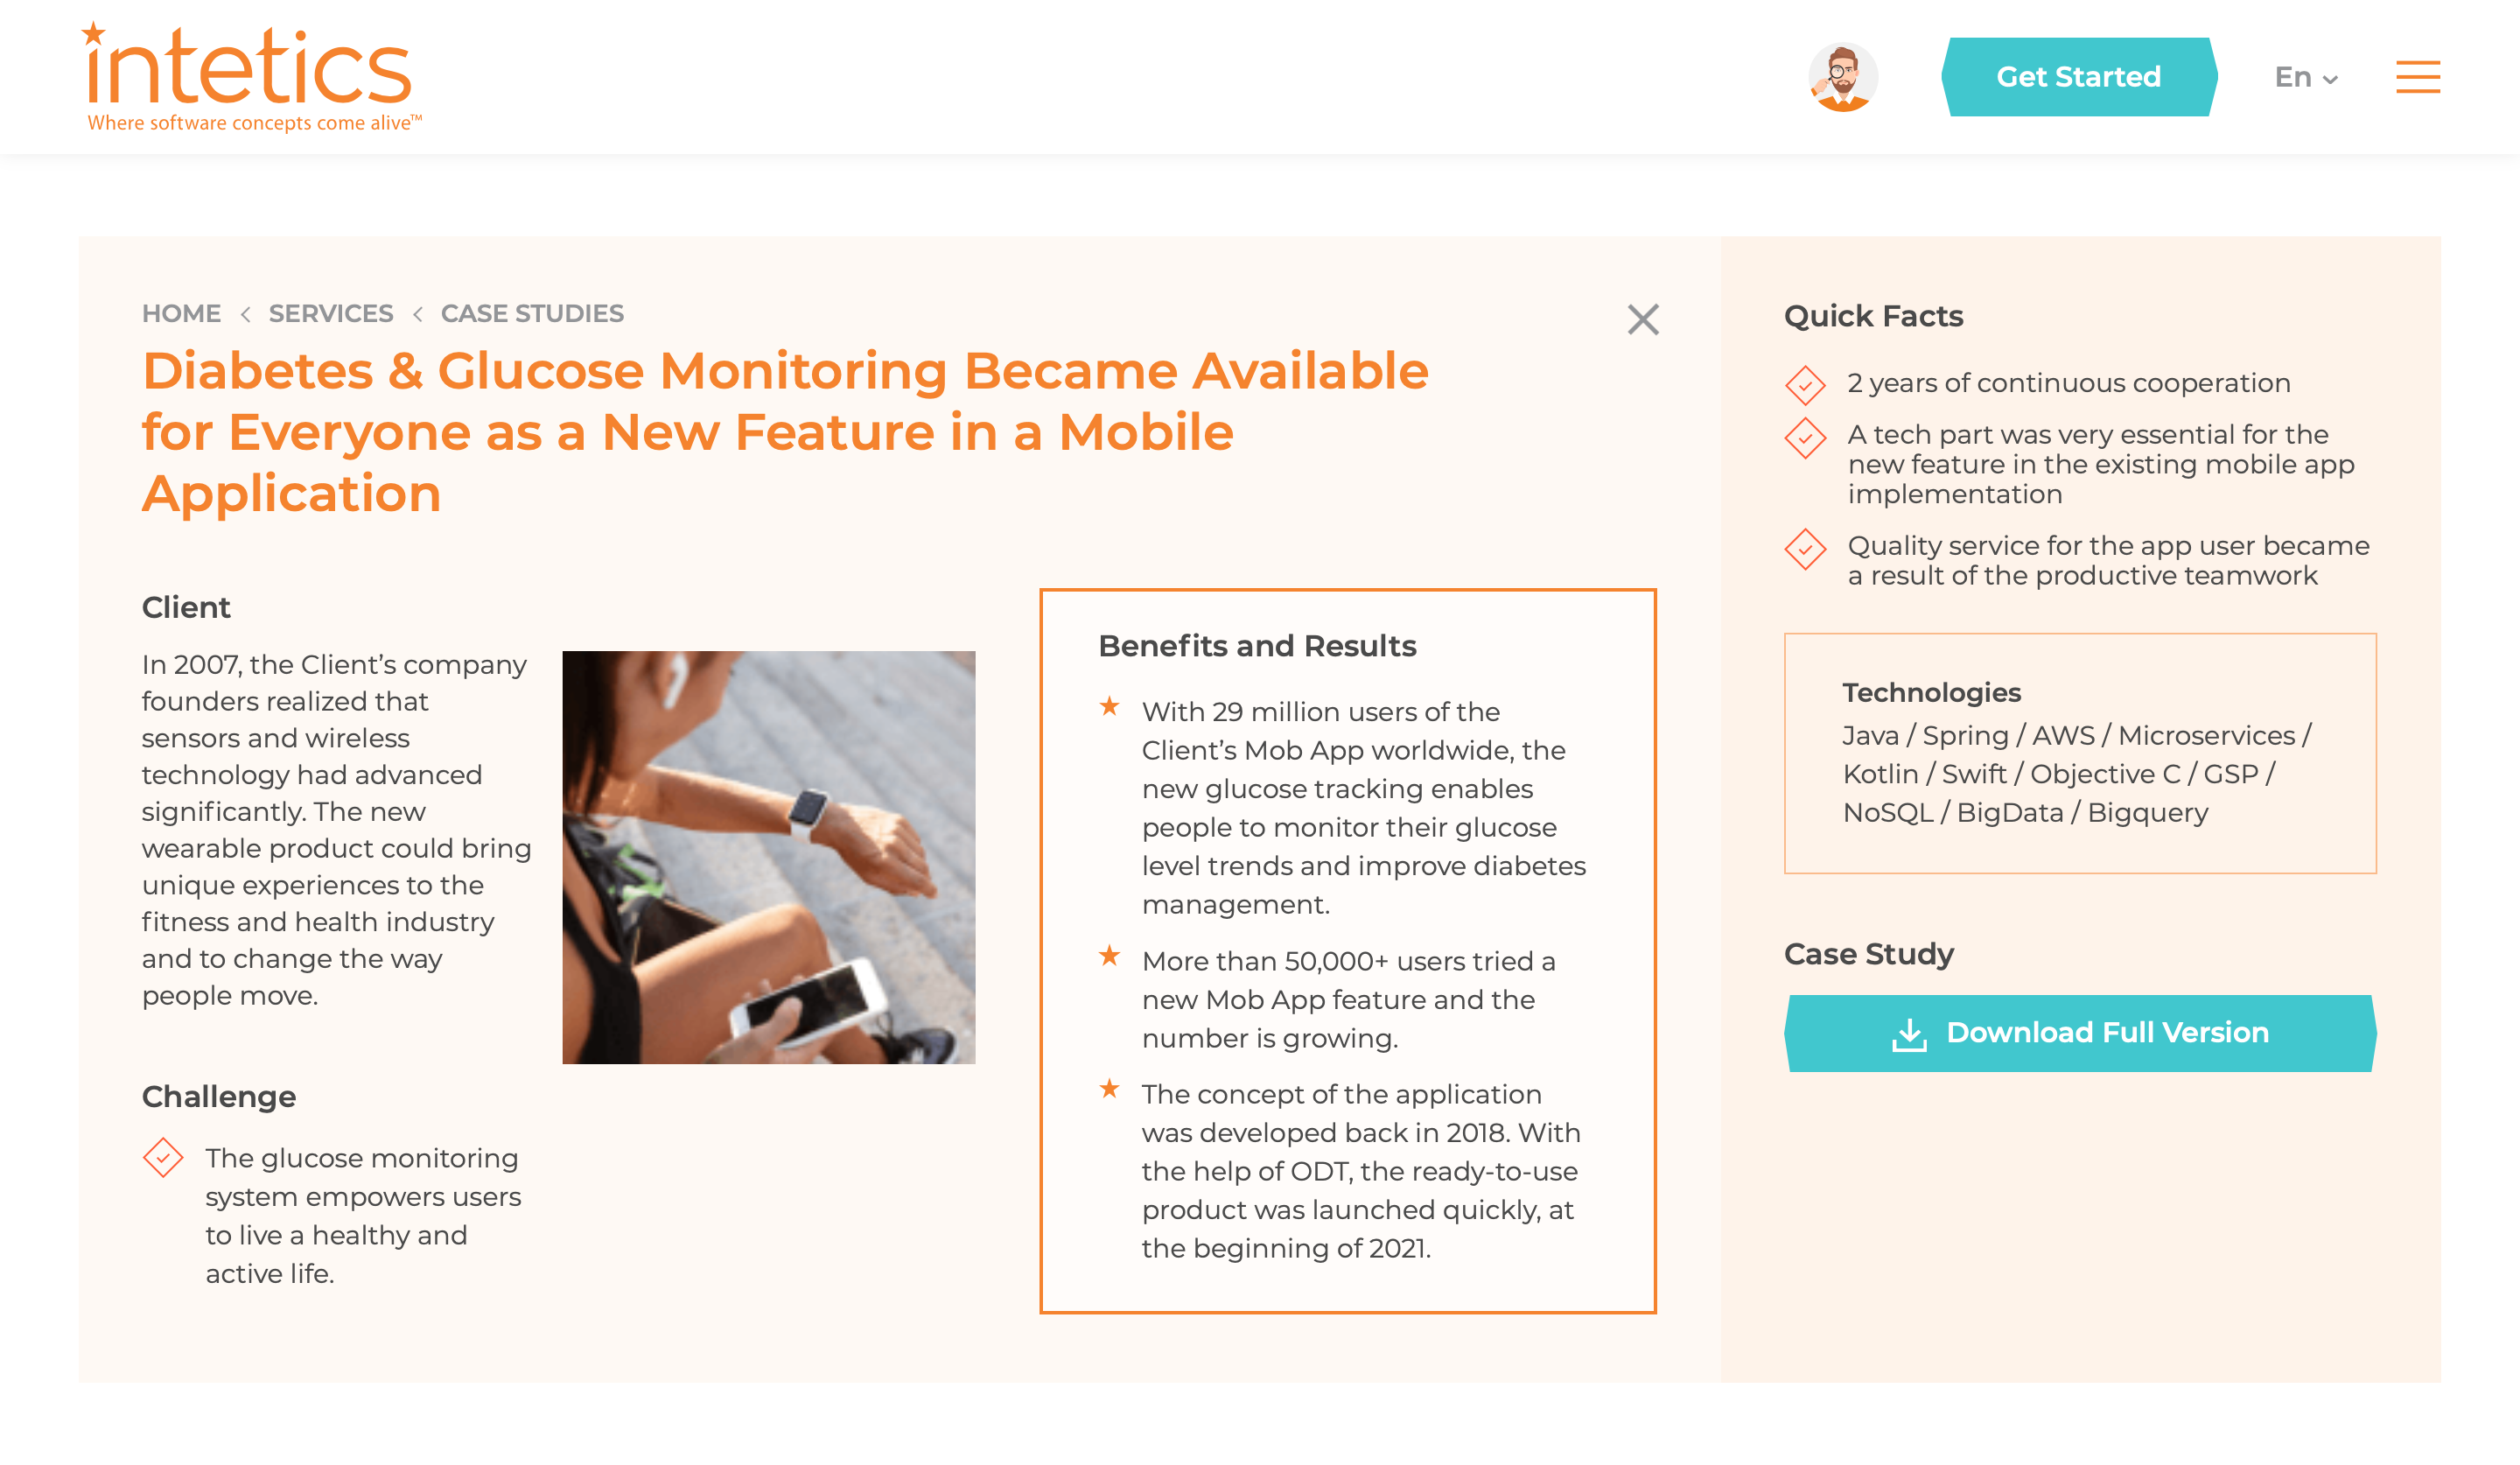 Diabetes and Glucose Monitoring Became Available for Everyone as a New Feature in a Mobile Application